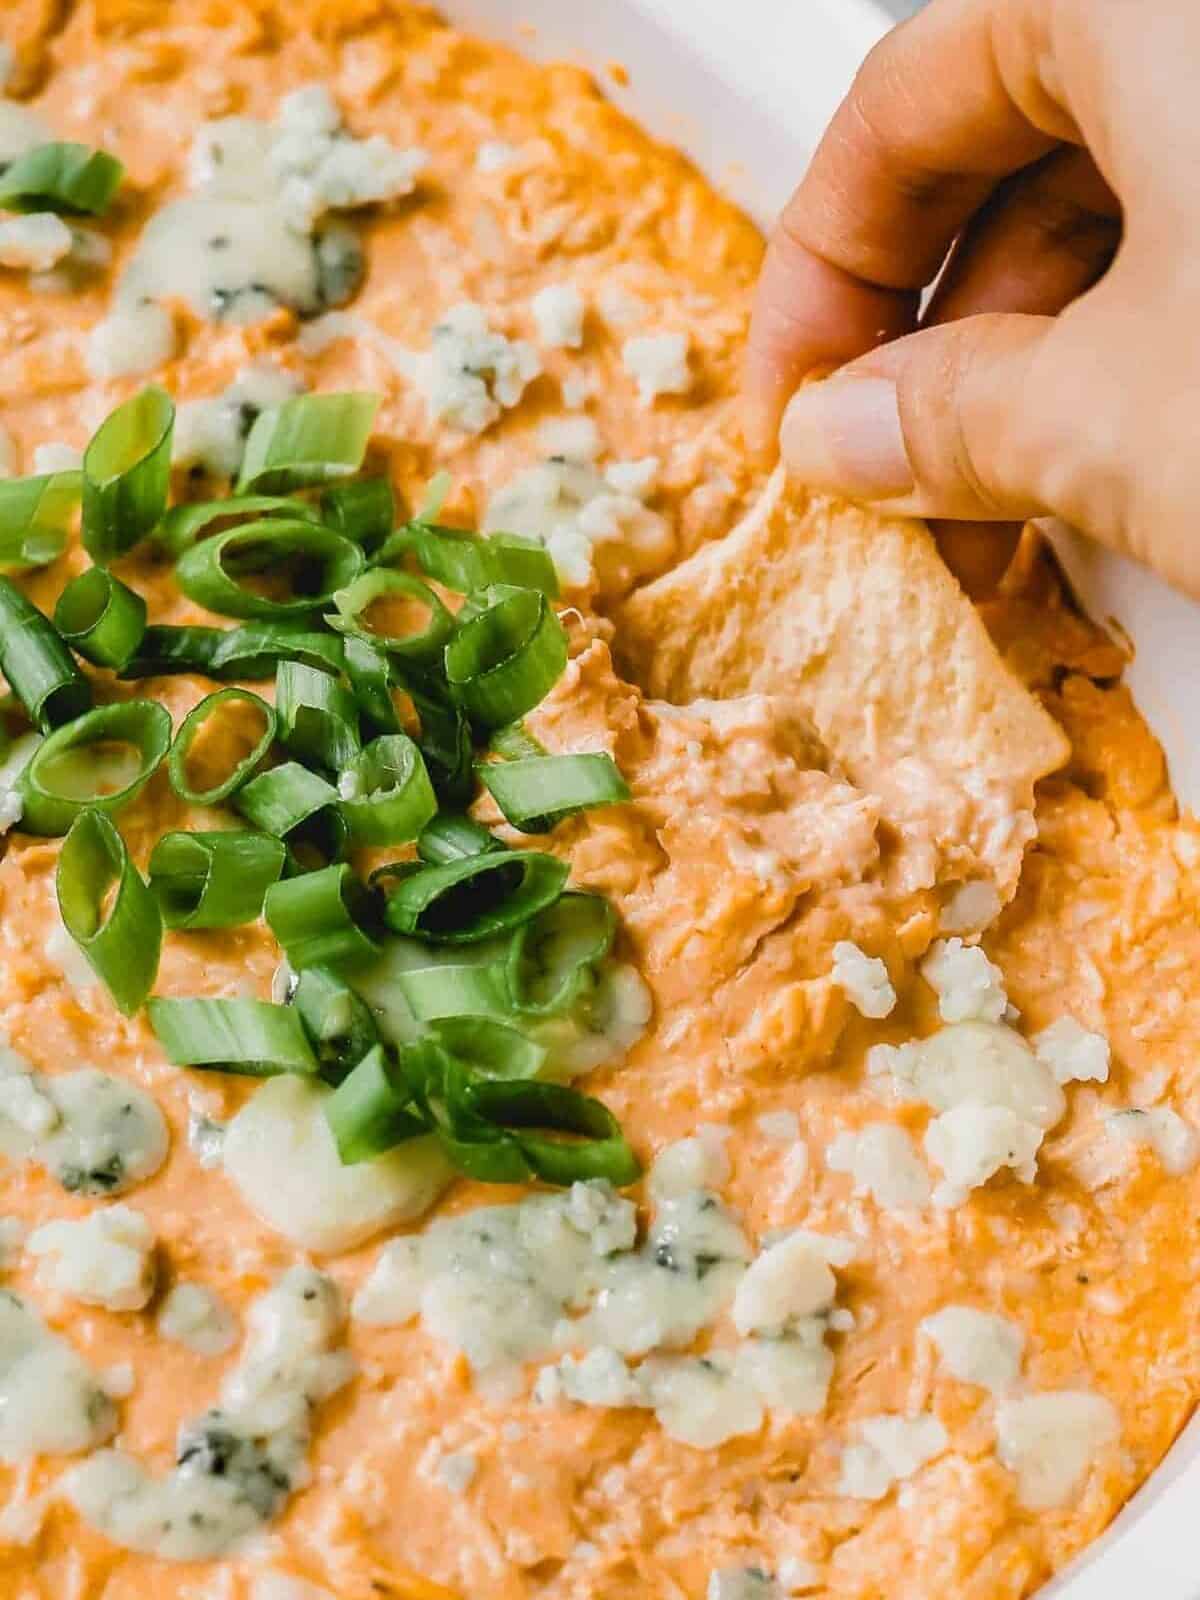 A chip scooping up some buffalo chicken dip topped with blue cheese crumbles and green onions.